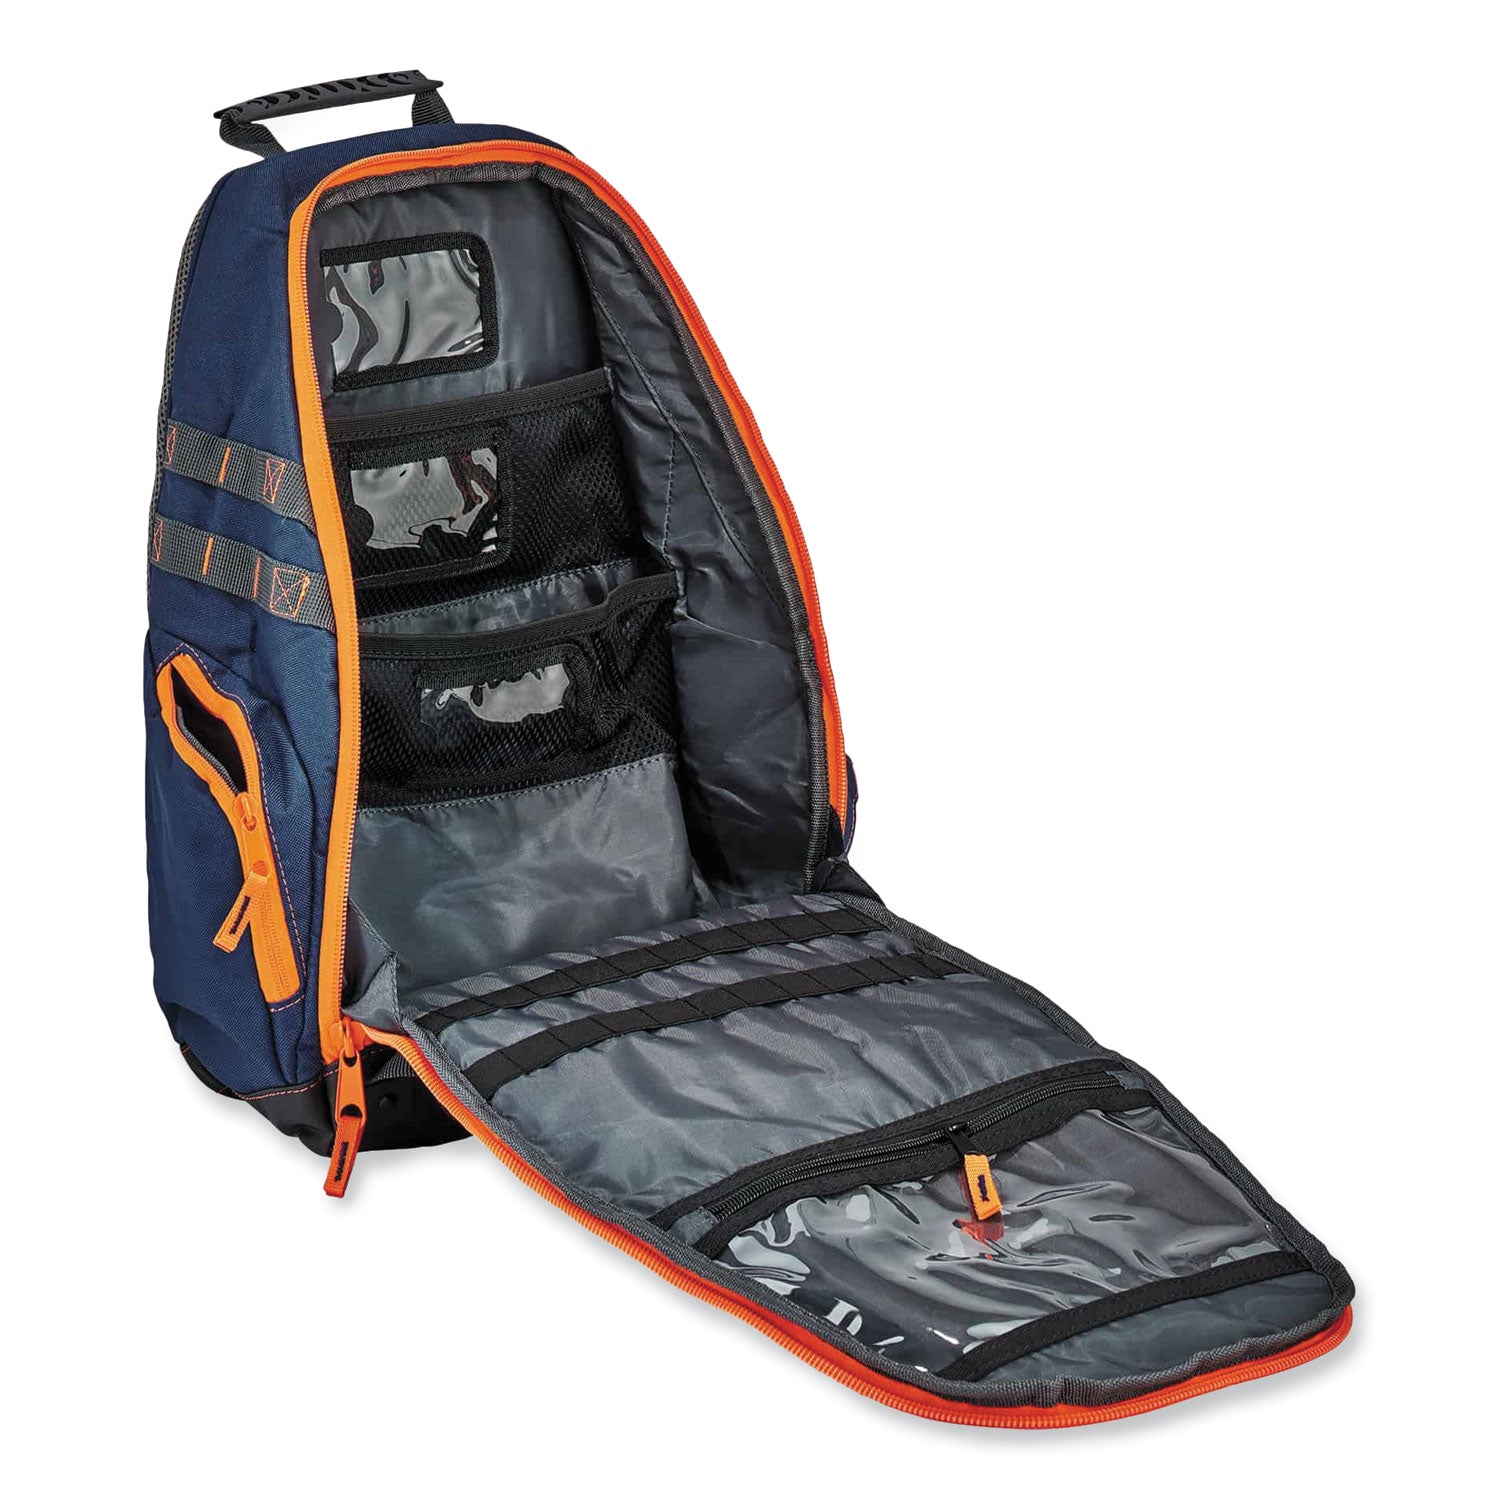 arsenal-5244-responder-backpack-8-x-145-x-20-blue-ships-in-1-3-business-days_ego13497 - 4